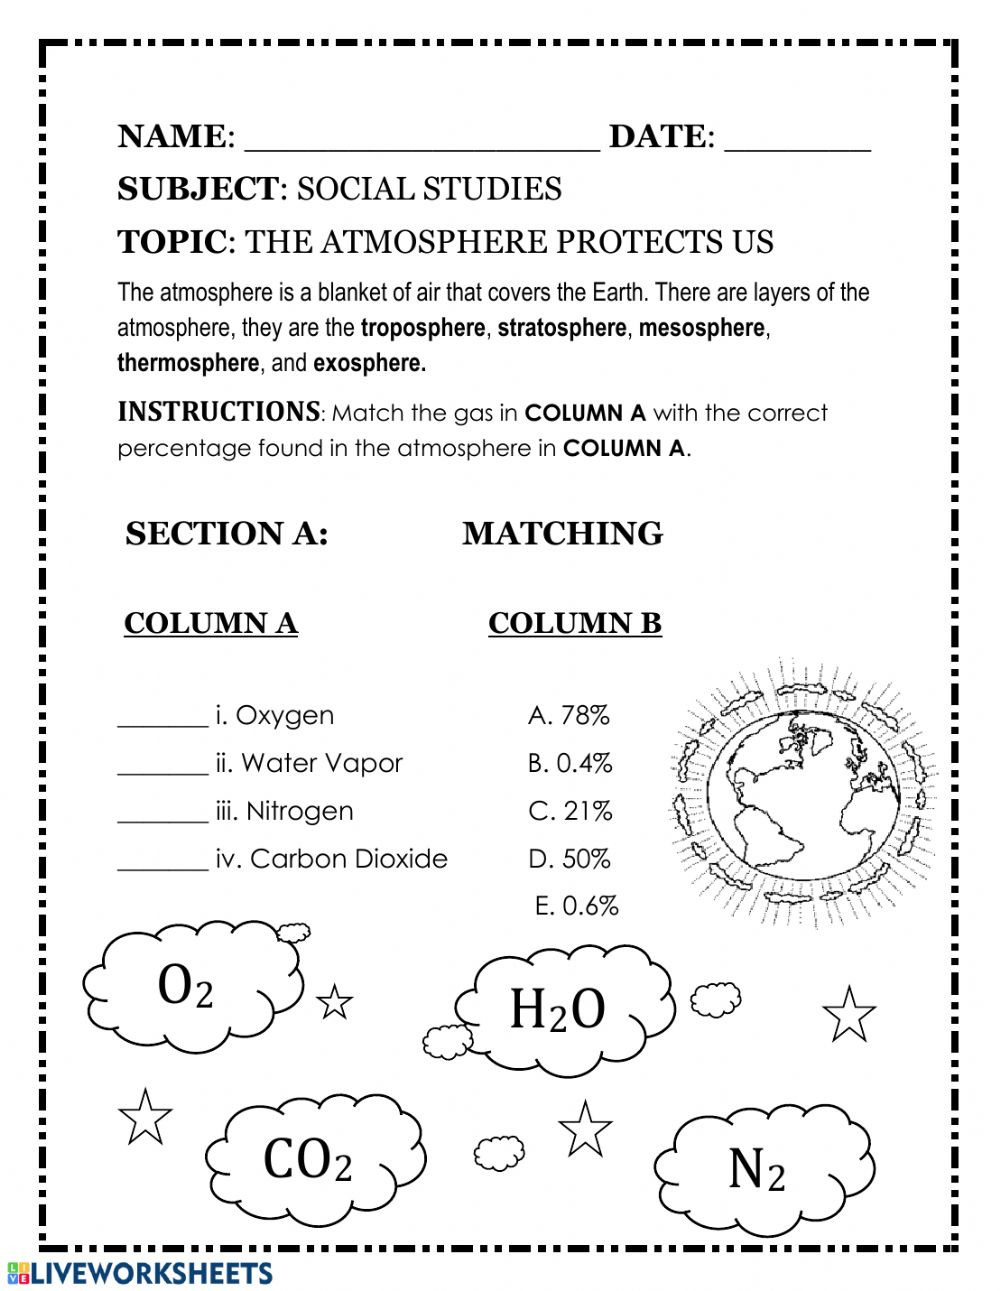 Layers Of the atmosphere Worksheet the atmosphere Protects Us Interactive Worksheet